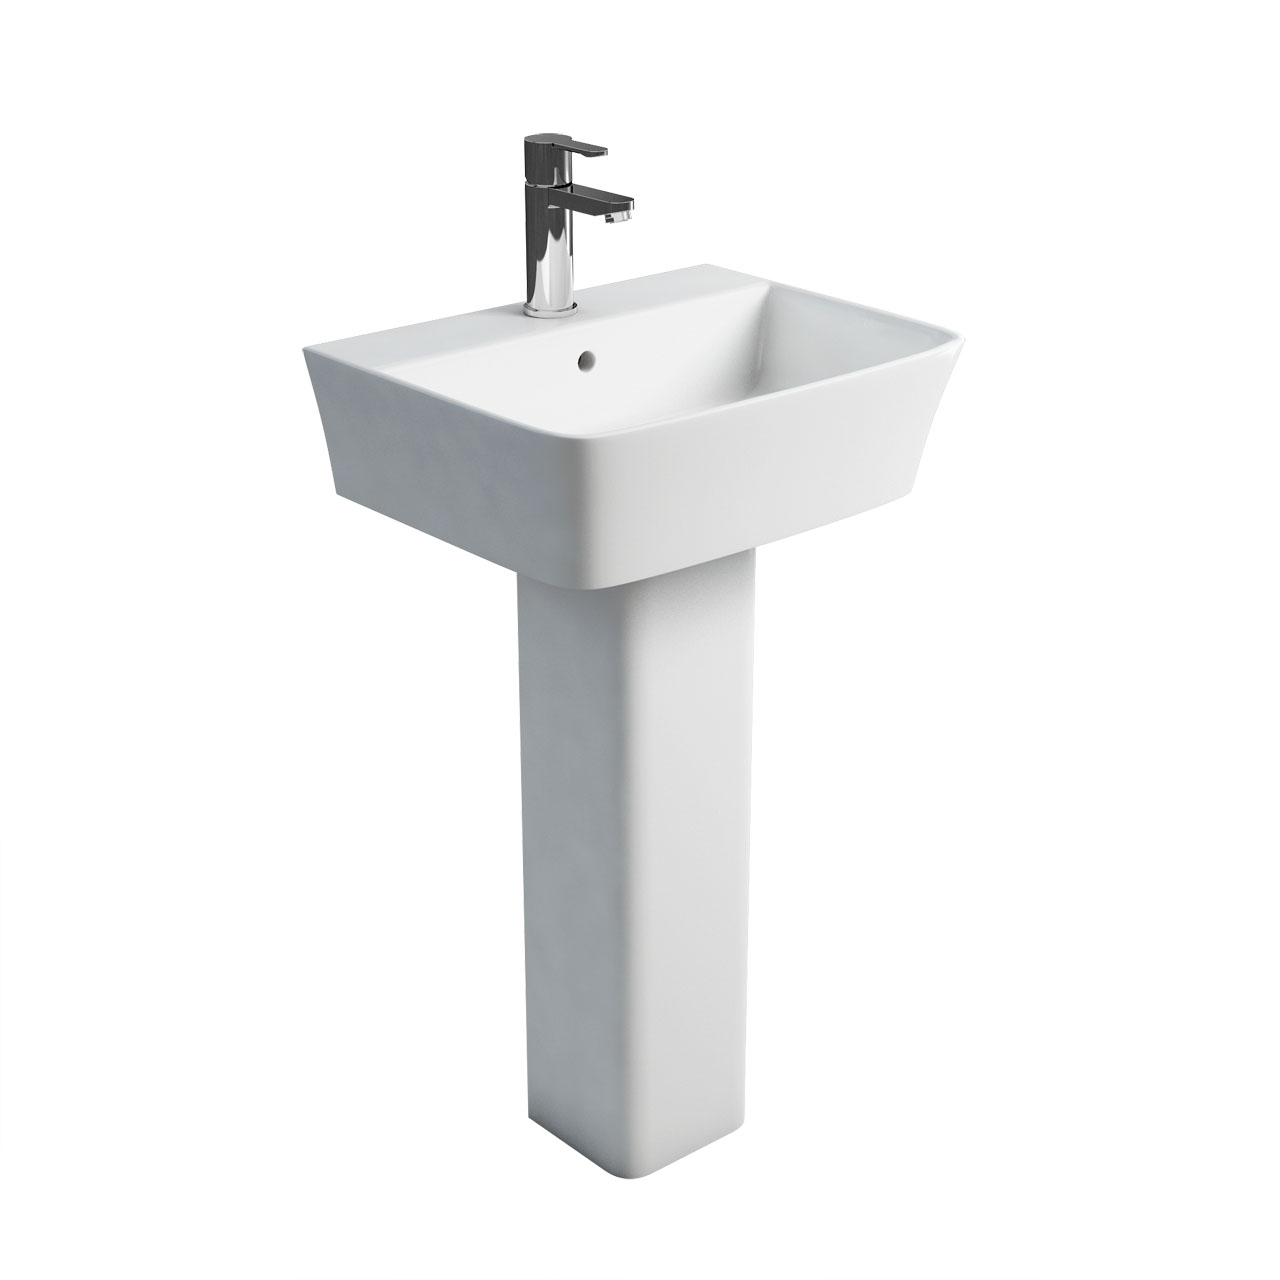 Fine S40 500 basin and square fronted pedestal